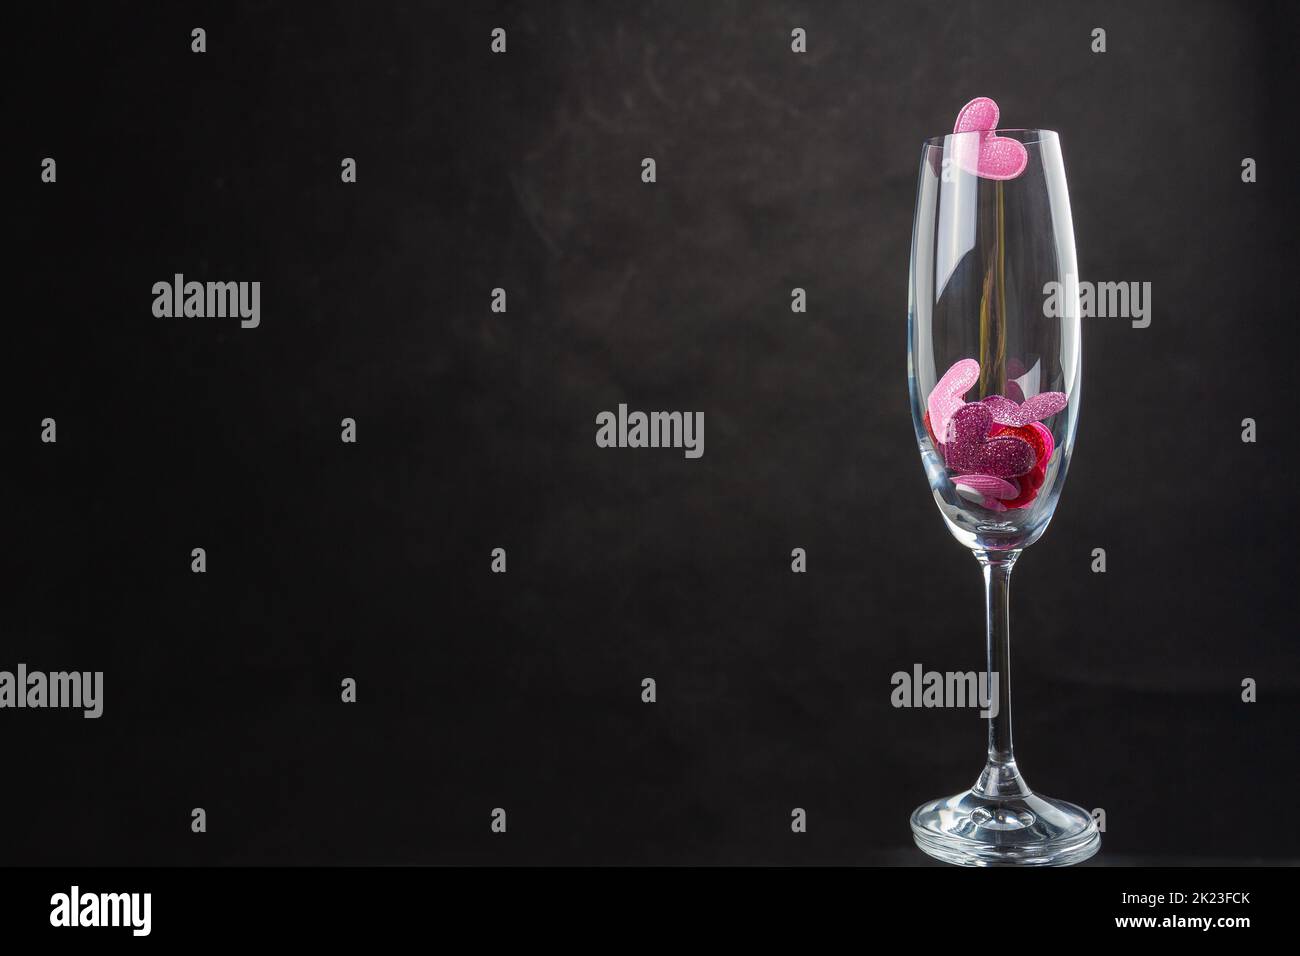 Champagne glass filled with sequin hearts. Copy space on black background. Stock Photo